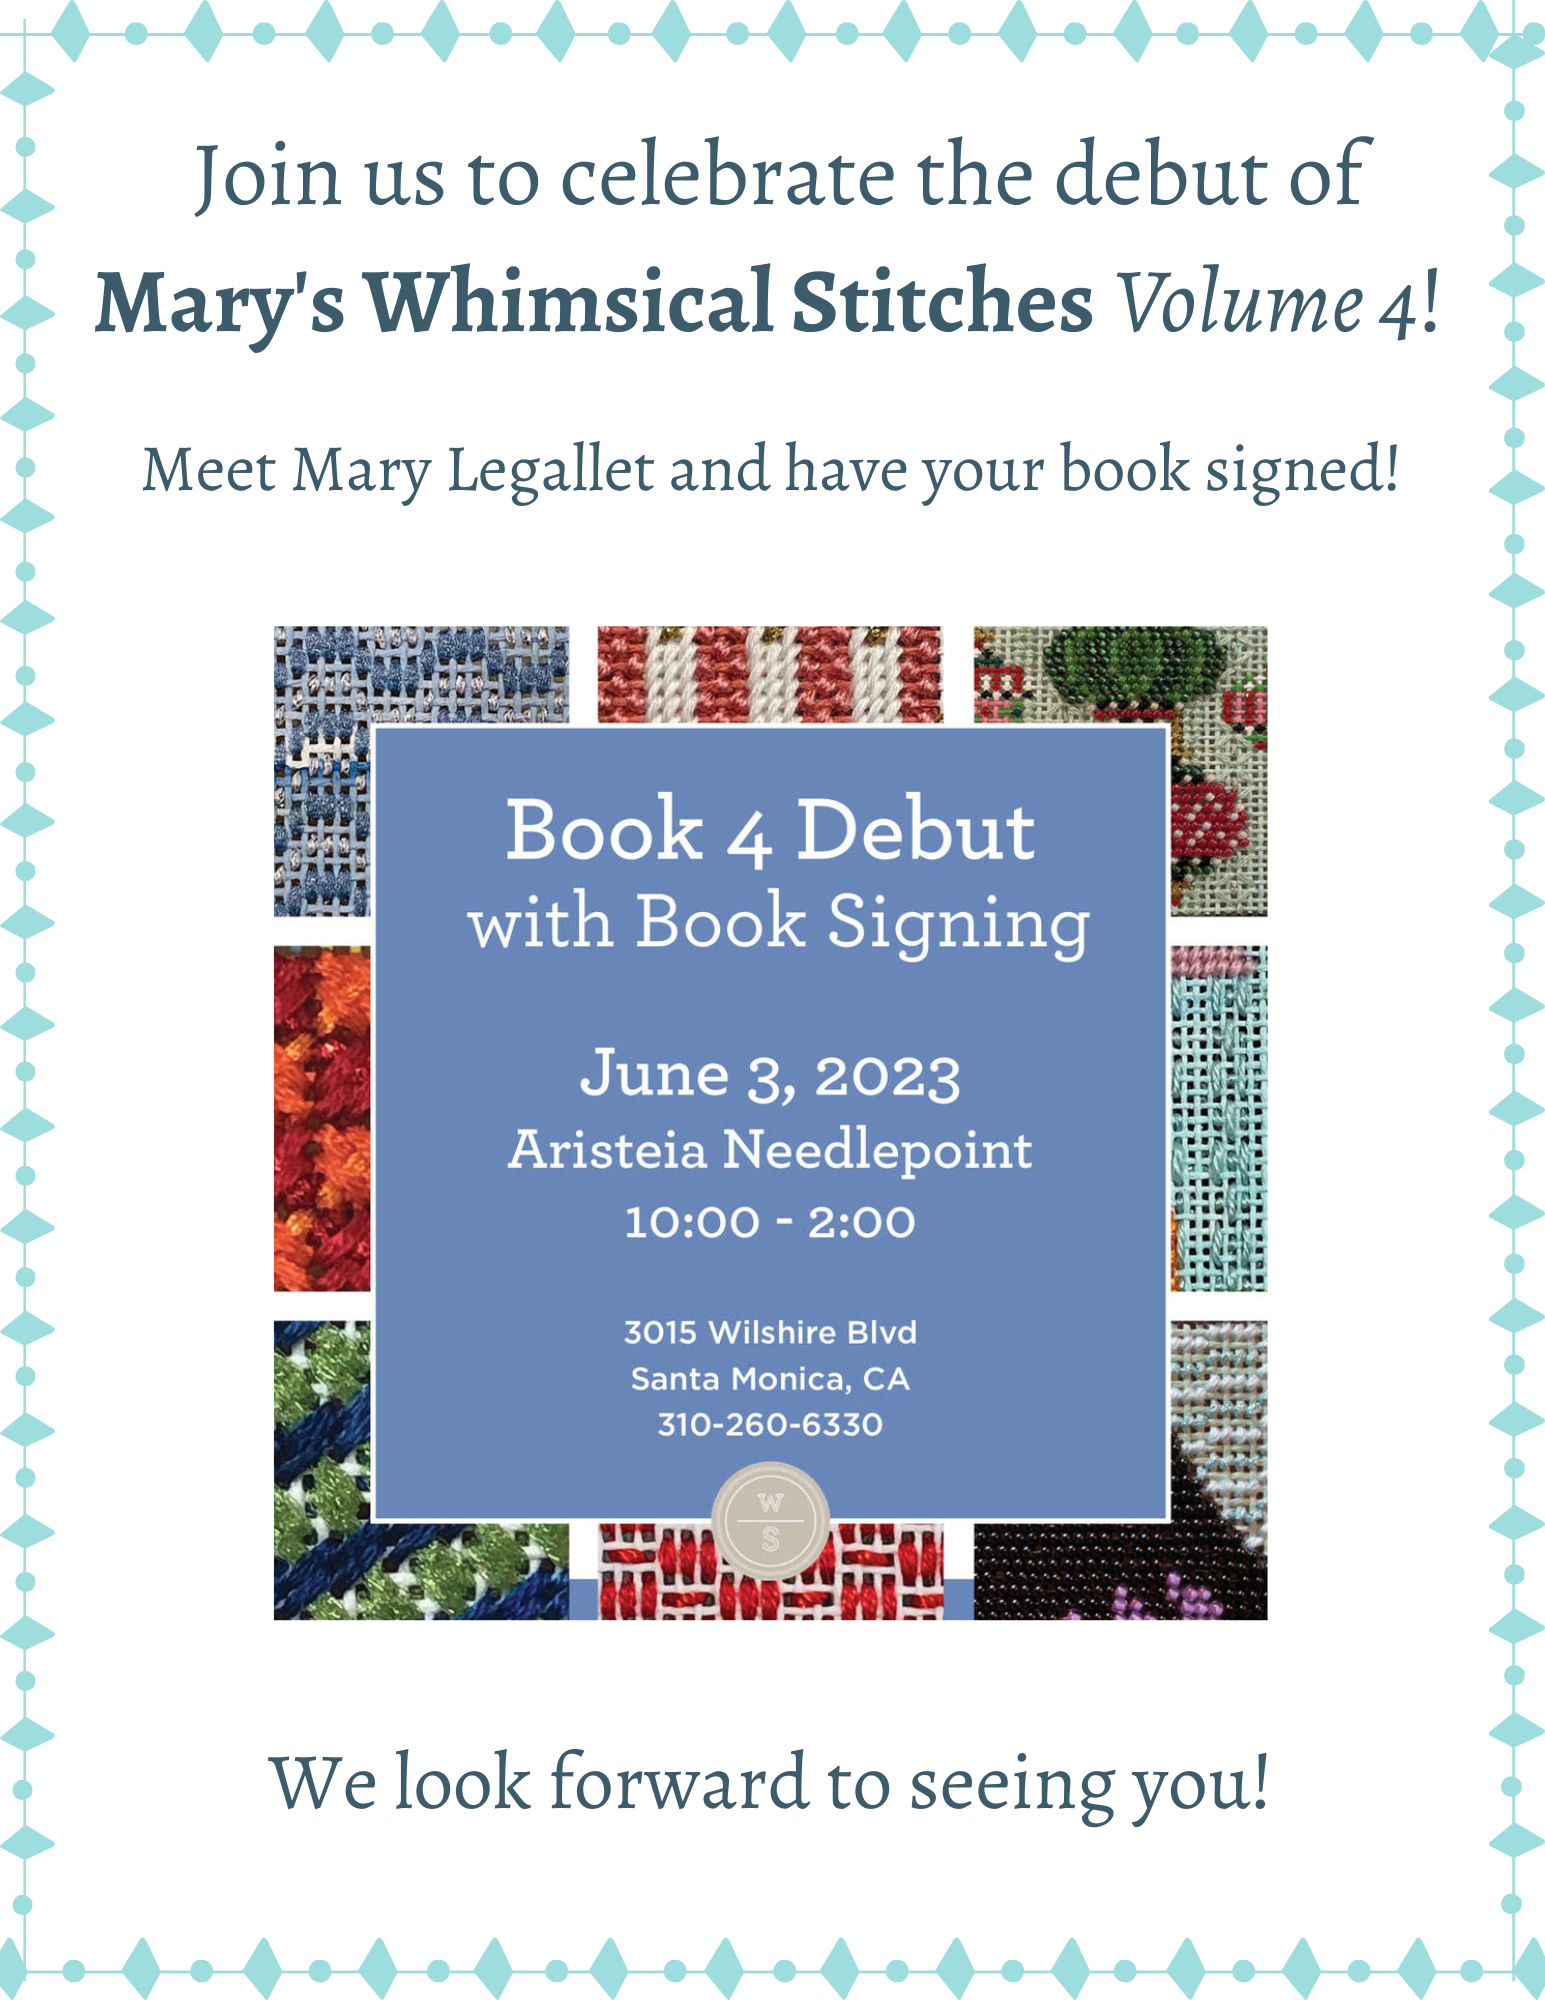 Mary's Whimsical Stitches 1 - Volume 1